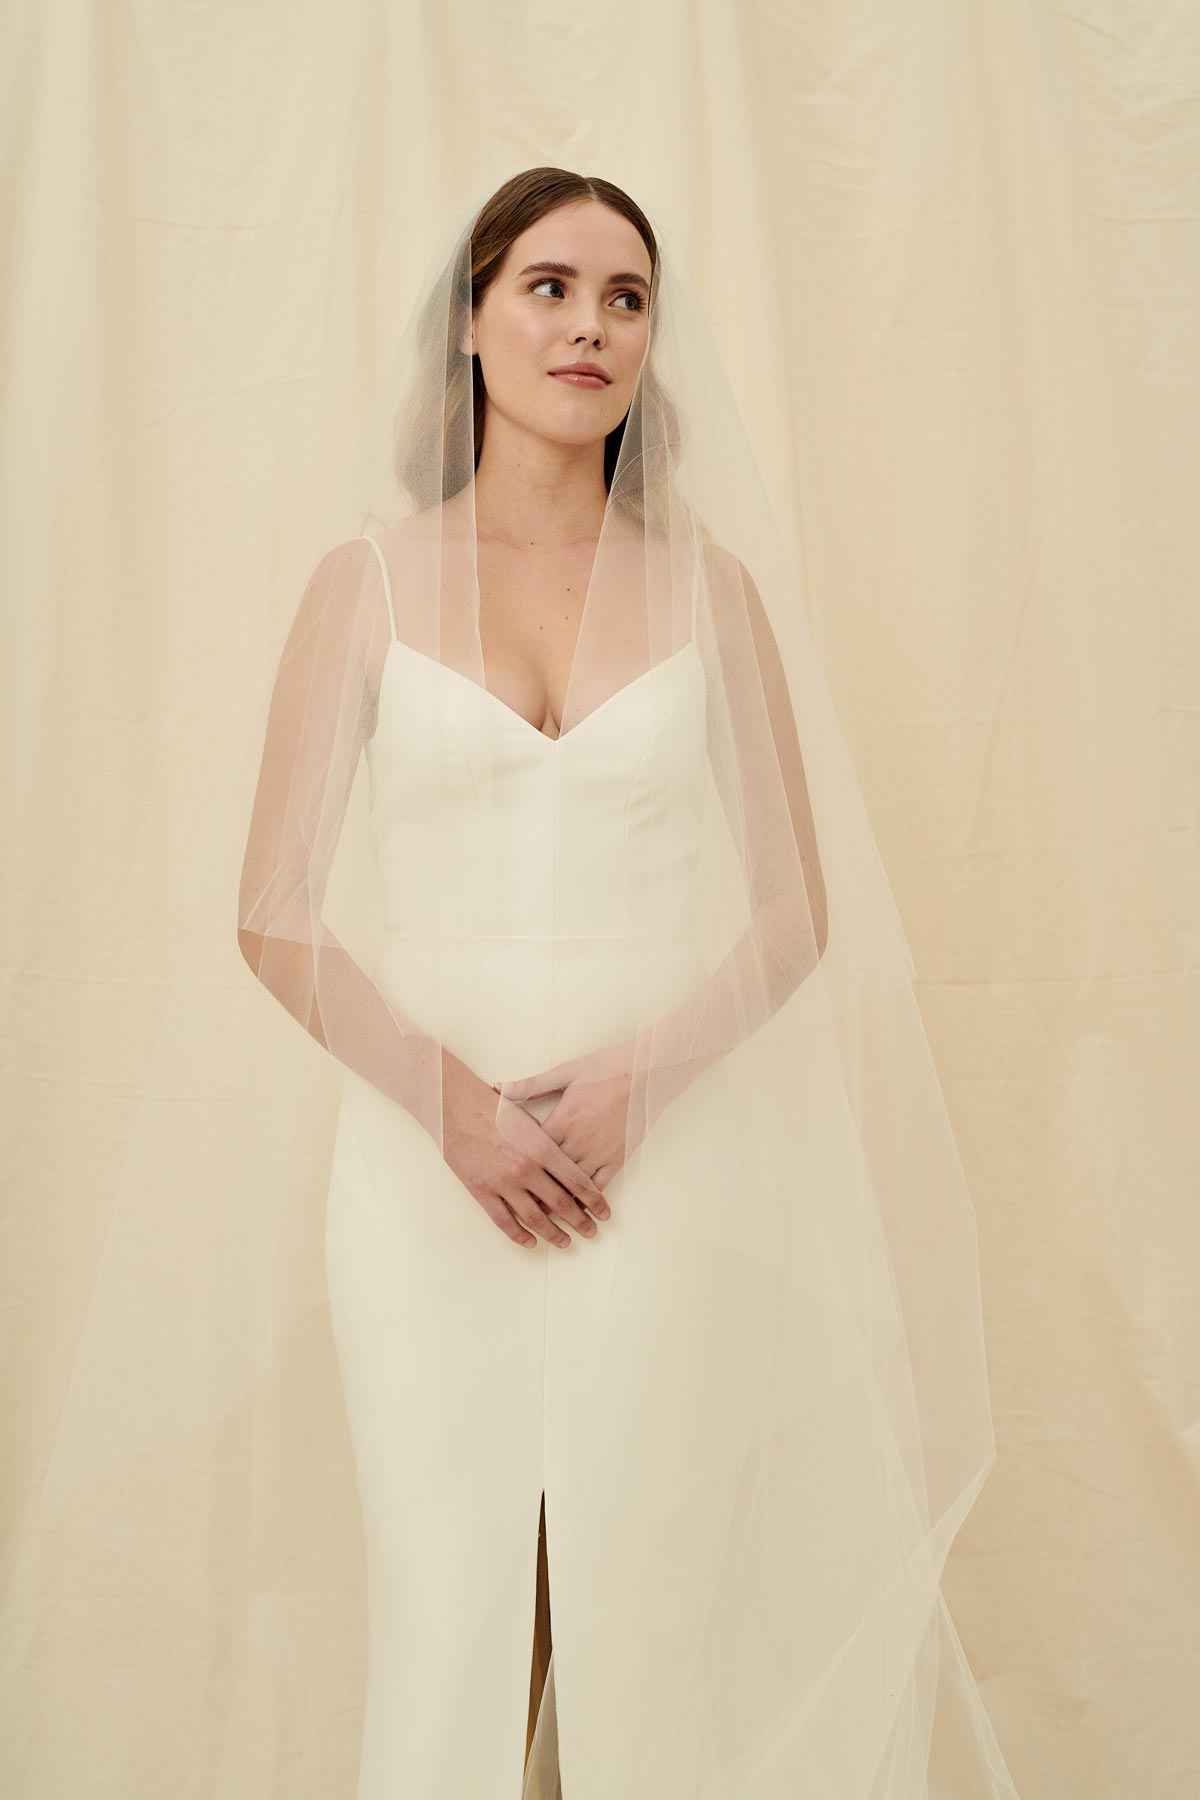 A simple veil with an extra long bottom layer and a front blusher